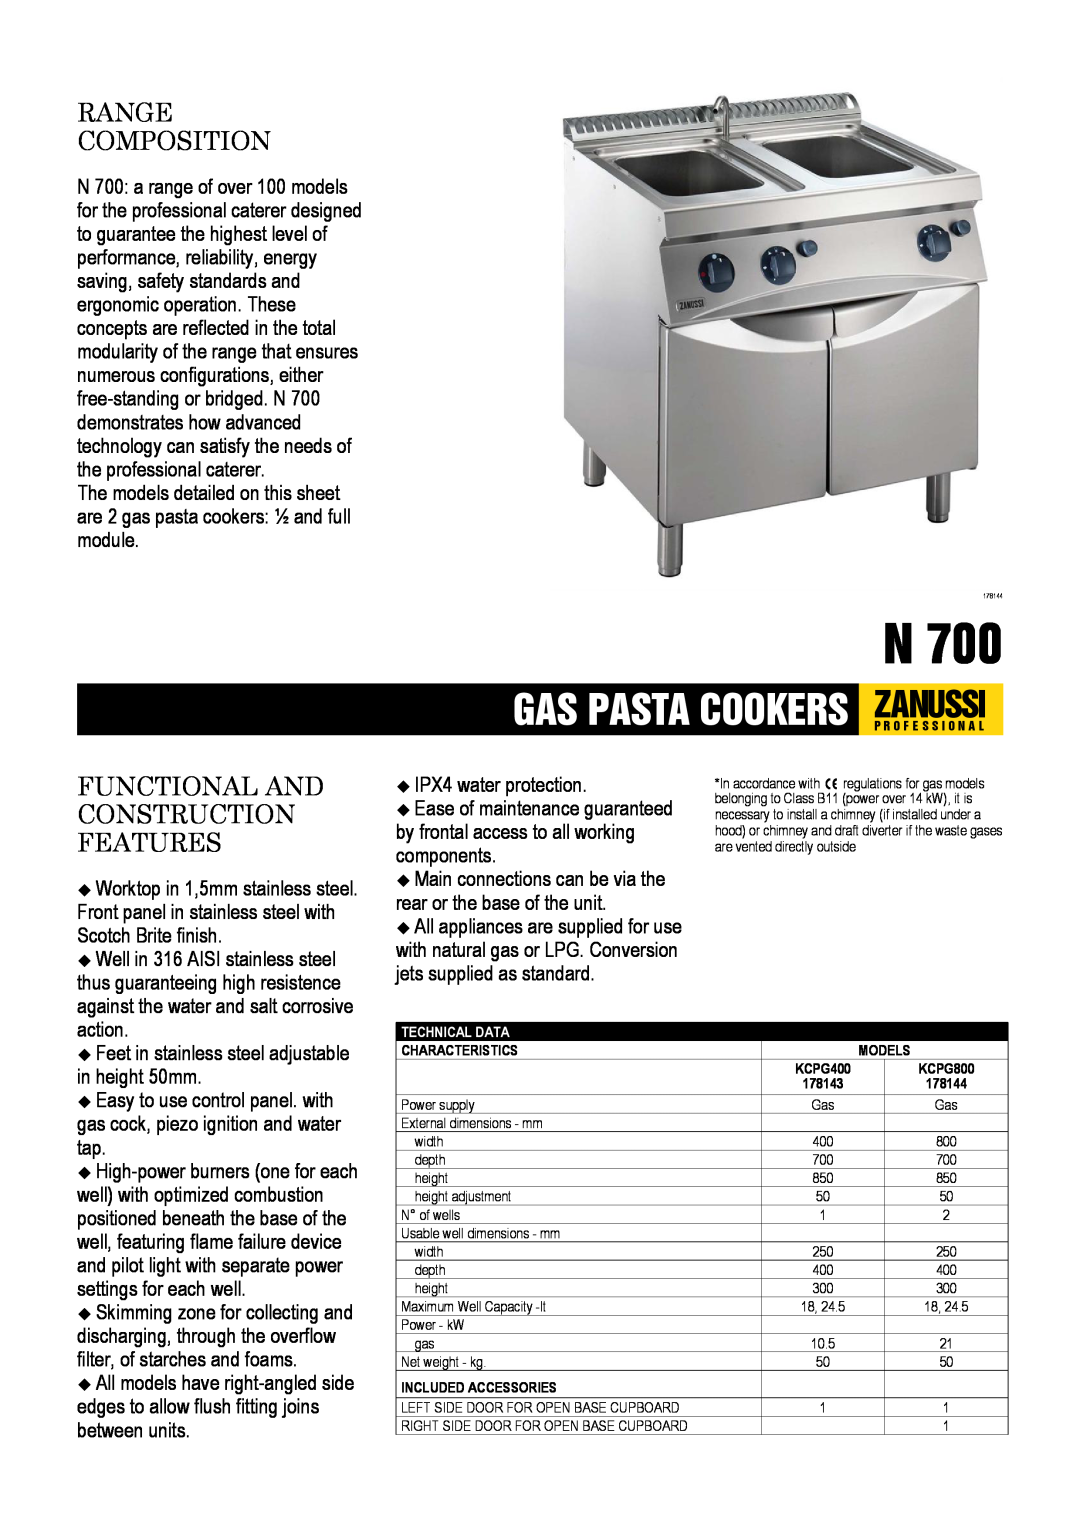 Zanussi 6204 dimensions Range Composition, Functional And Construction Features 